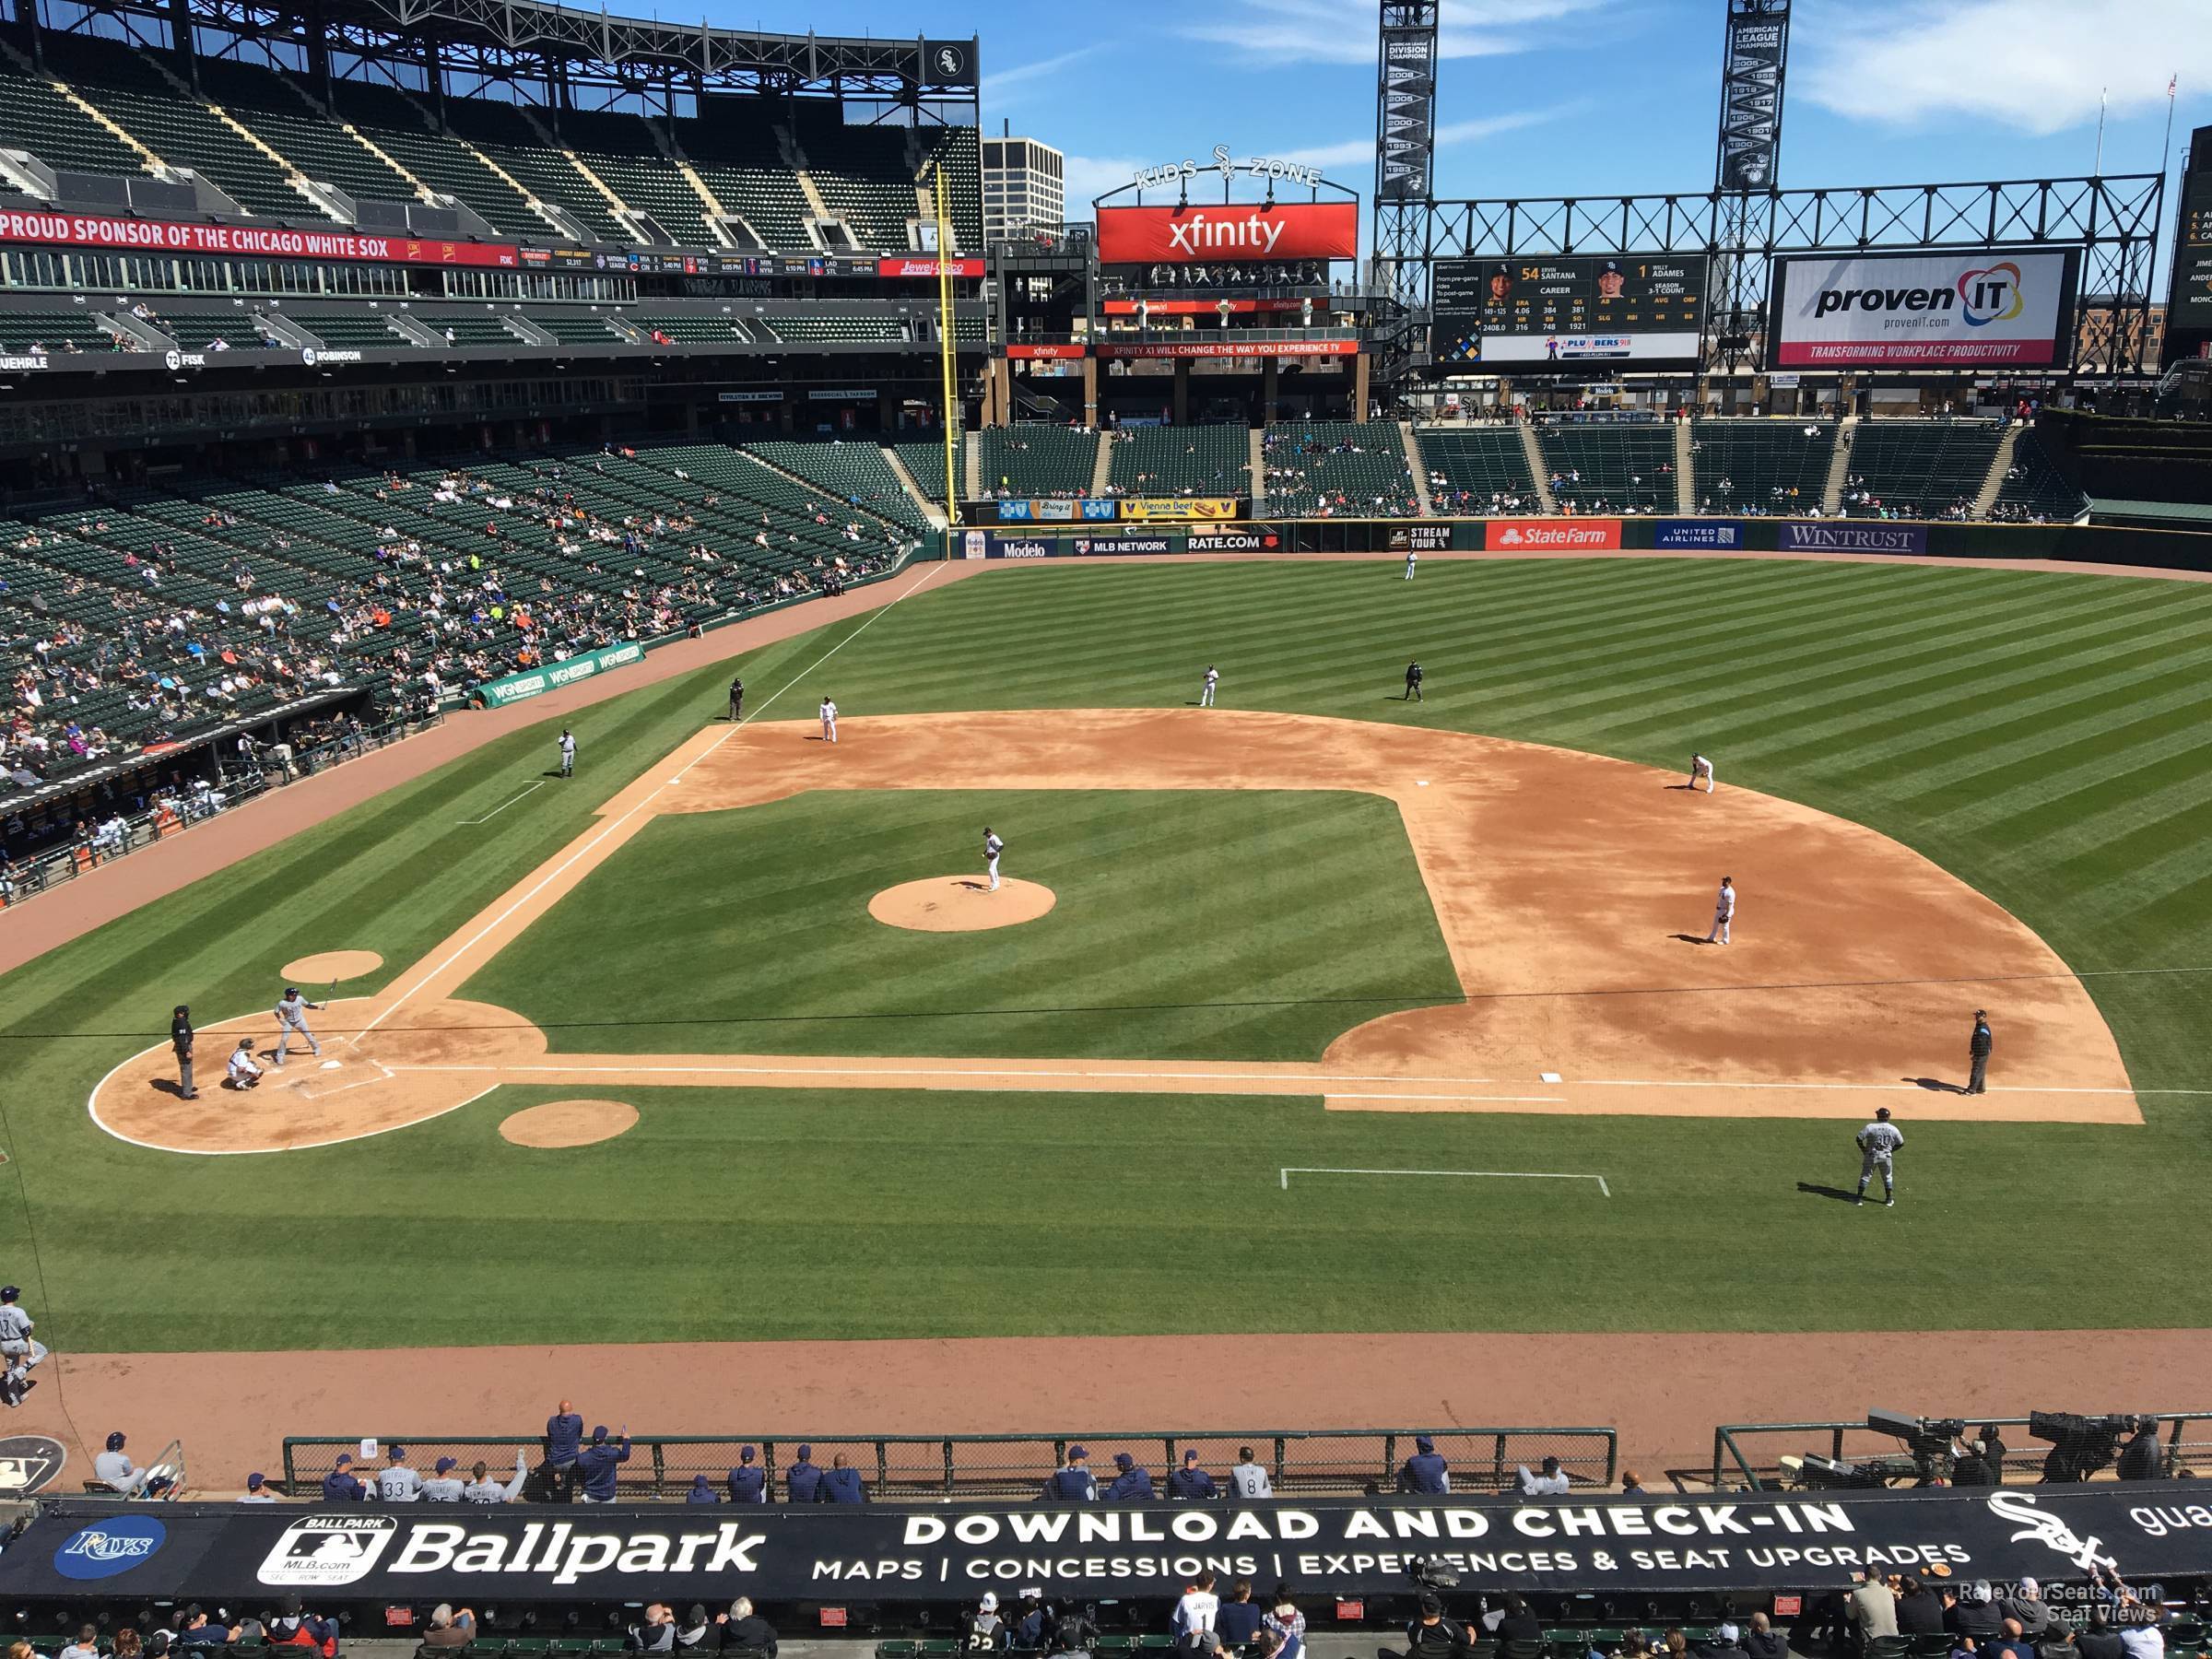 section 326, row 1 seat view  - guaranteed rate field